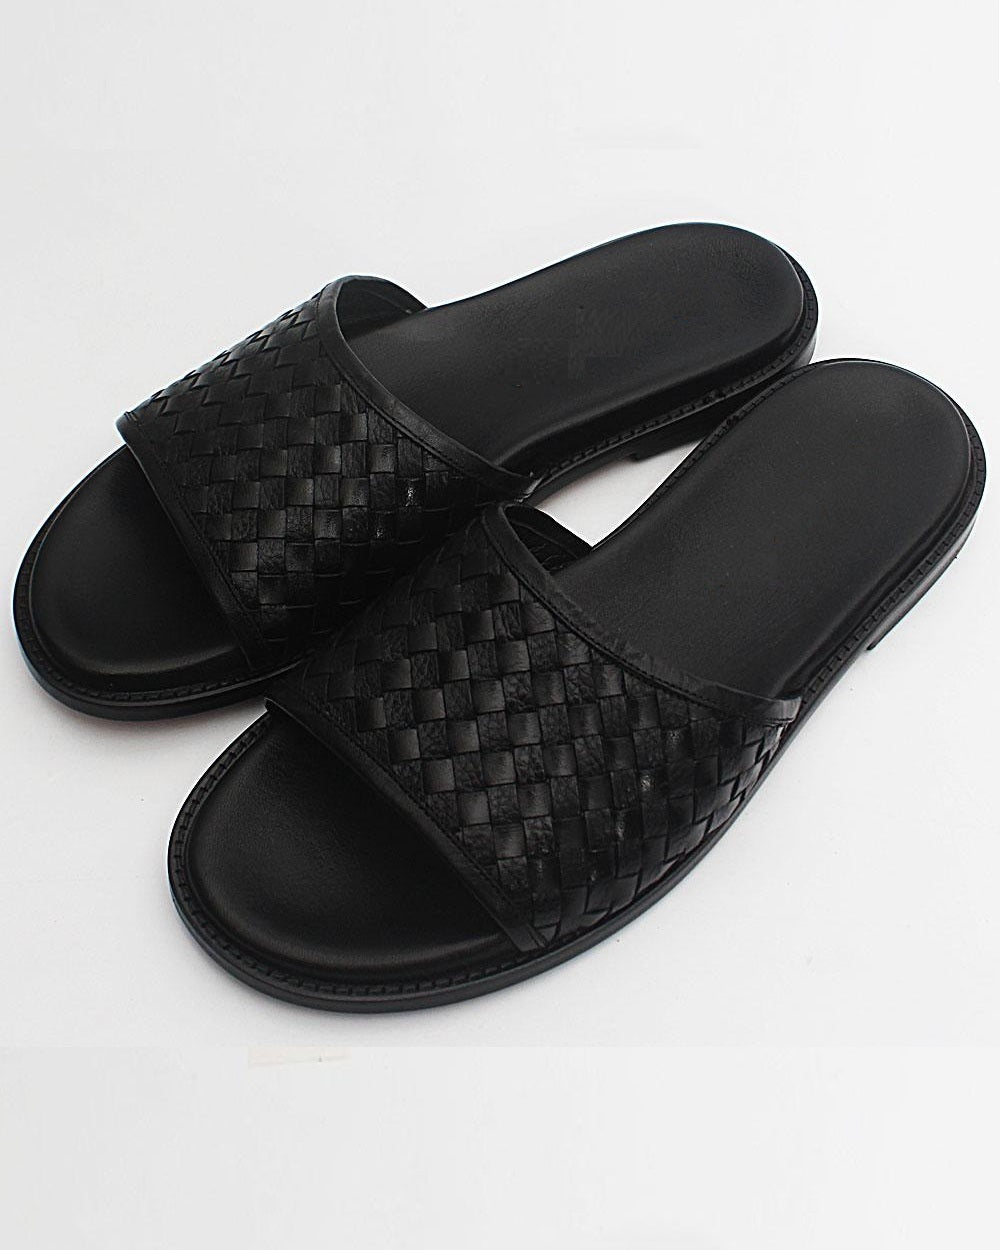 WEAVED CROSS LEATHER SLIPPERS